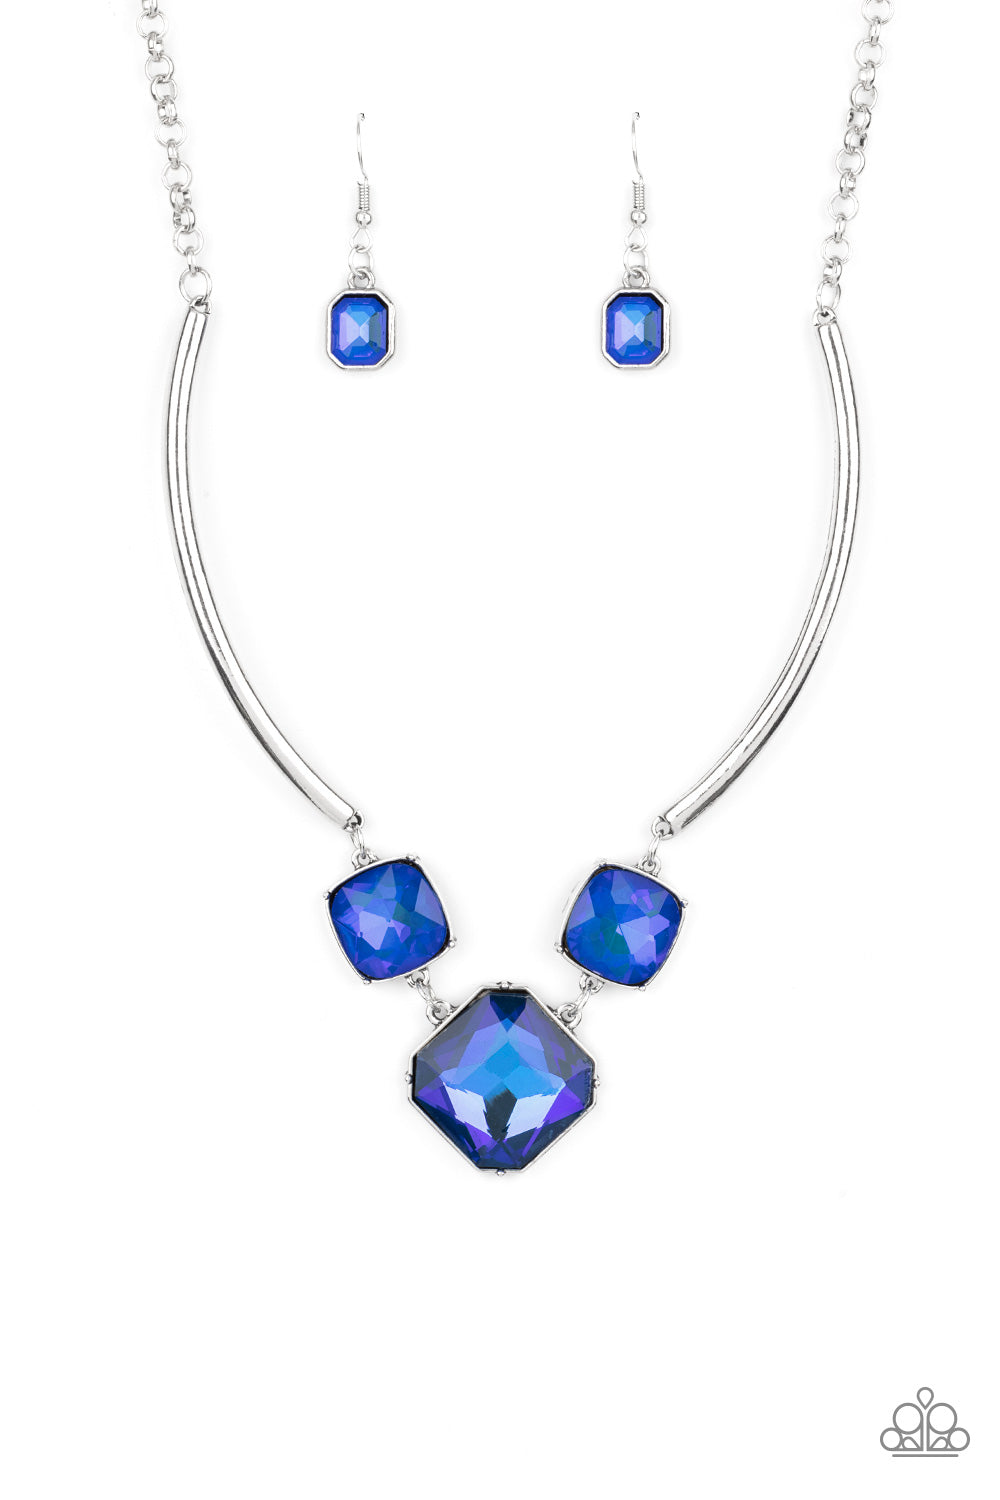 Divine IRIDESCENCE Blue Necklace - Paparazzi Accessories  Featuring a subtle UV shimmer, an oversized collection of radiant cut blue gems delicately link at the bottom of two curved silver rods. Attached to shiny silver chains, the glamorously glitzy display sparkles below the collar for a jaw-dropping finish. Features an adjustable clasp closure.  All Paparazzi Accessories are lead free and nickel free!  Sold as one individual necklace. Includes one pair of matching earrings.